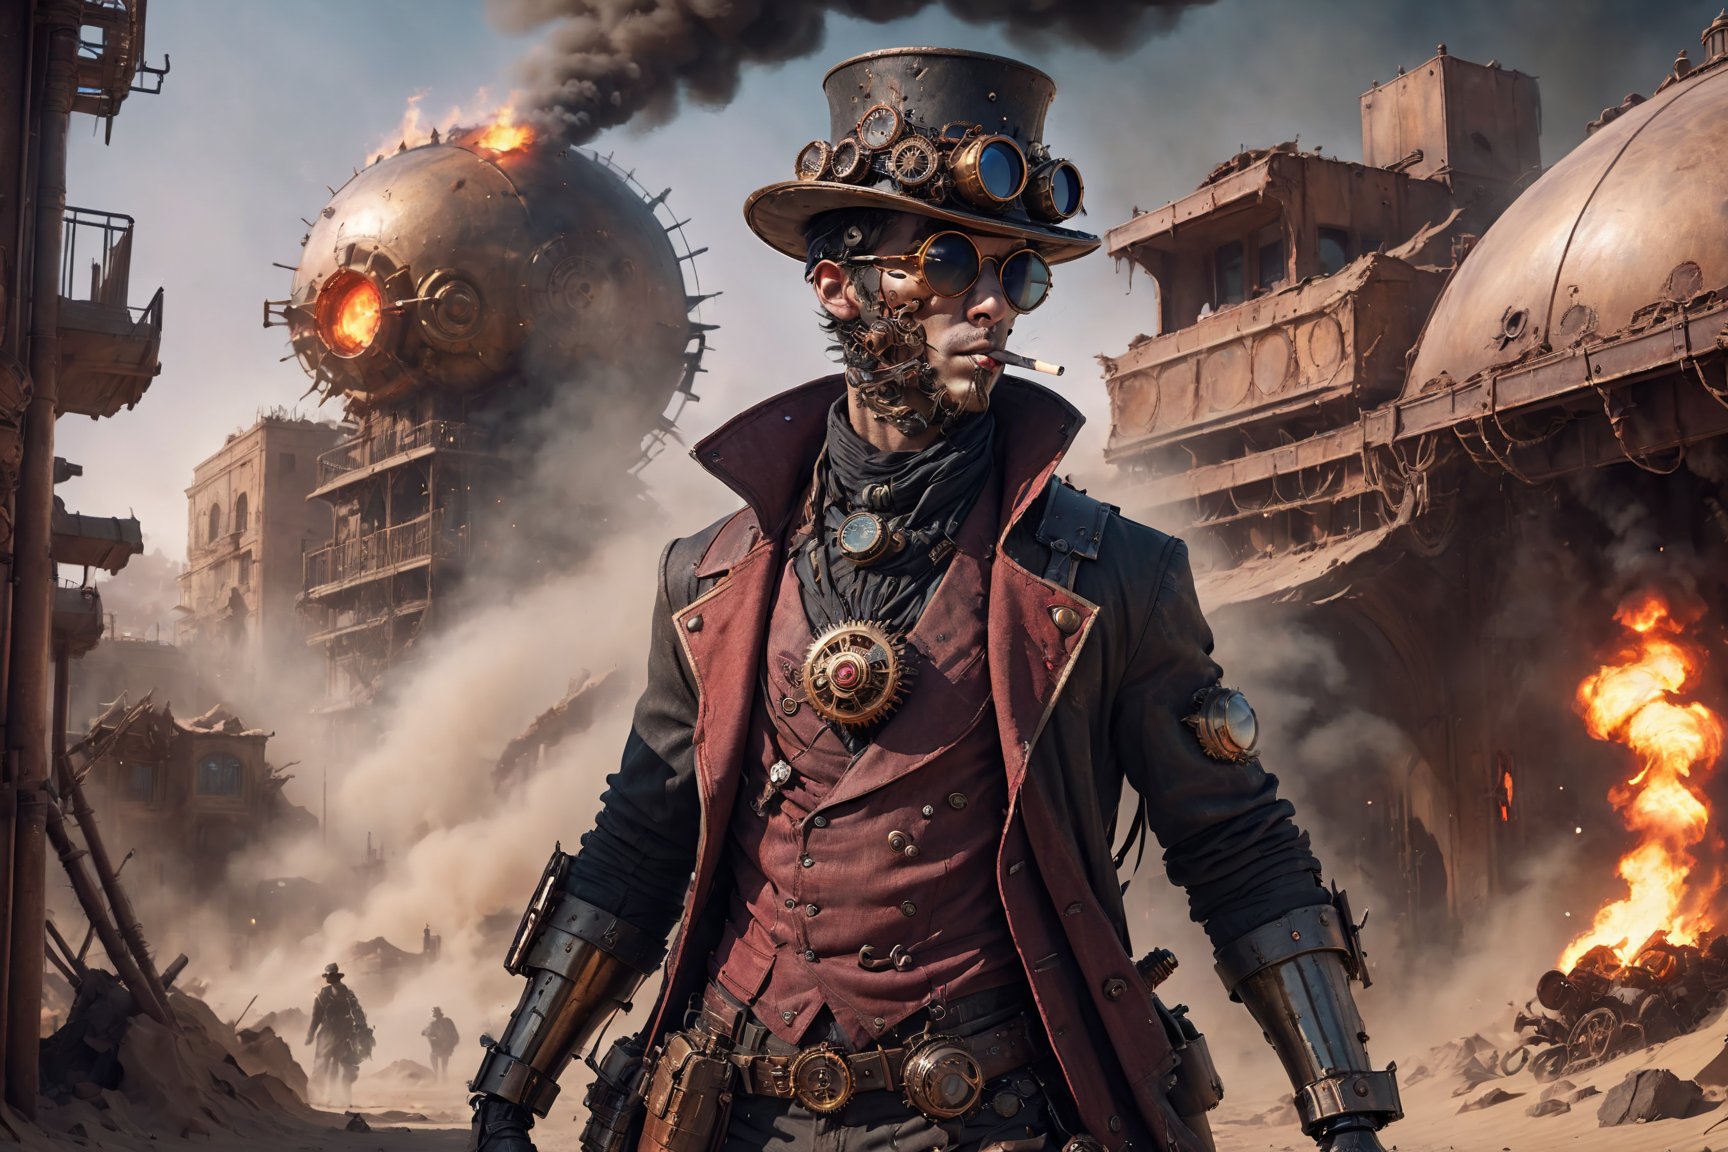 Surviving steampunk guy with torn clothing, hat, sunglasses, cigarette in mouth, use rifle, alien structure, realistic, stylish, rutkowski, hdr, intricate details, hyperdetailed, cinematic, rim light, danger atmosphere, night, red light, destroyed street, 4k, fire, nuclear bomb, apocalyptic powder, Dune,steampunk style